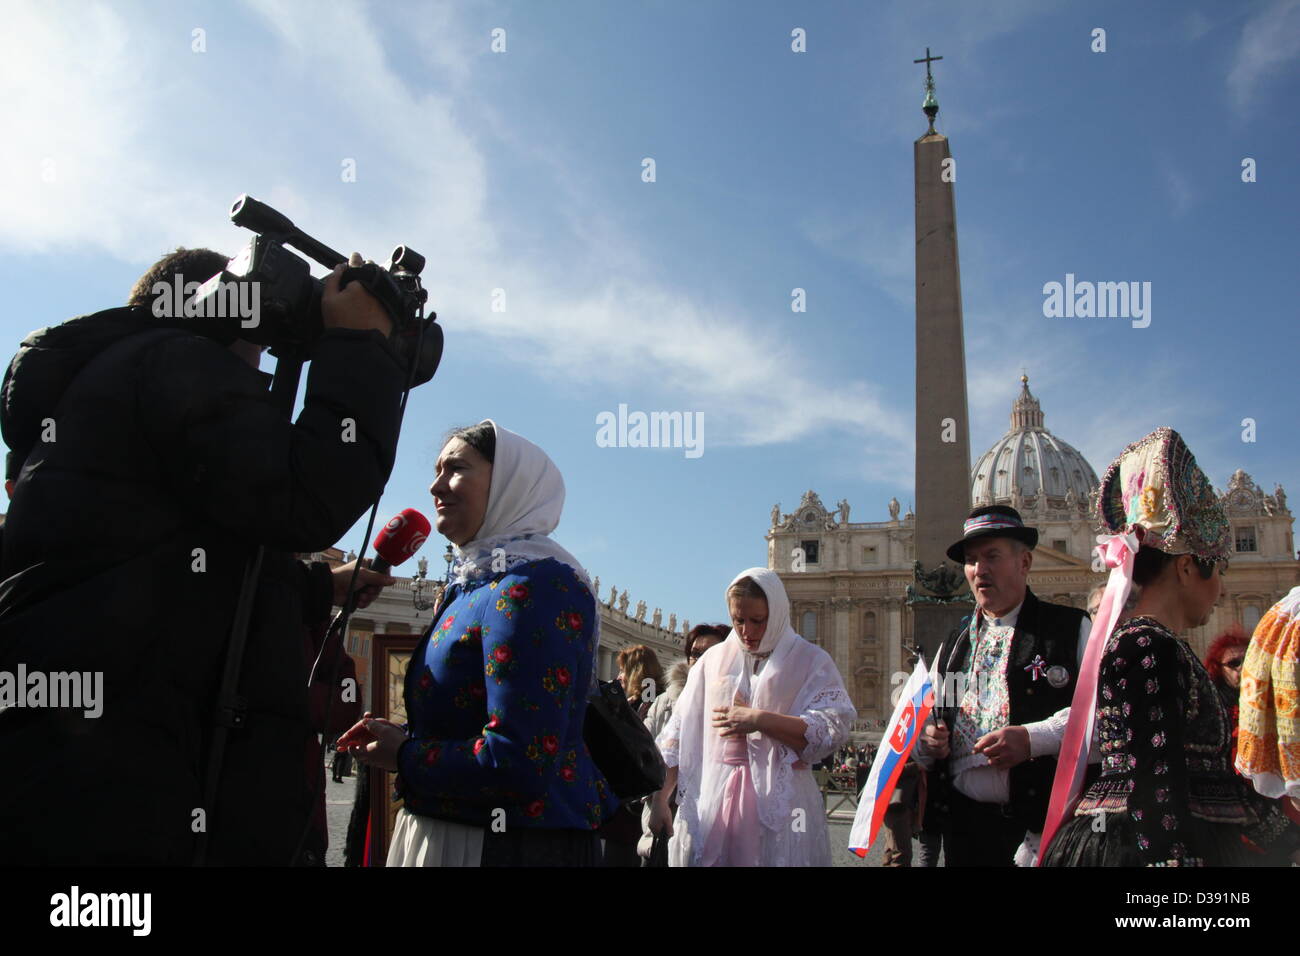 13 Feb 2013 The world's media at the Vatican City, Rome following the resignation announcement by Pope Benedict XVI Stock Photo